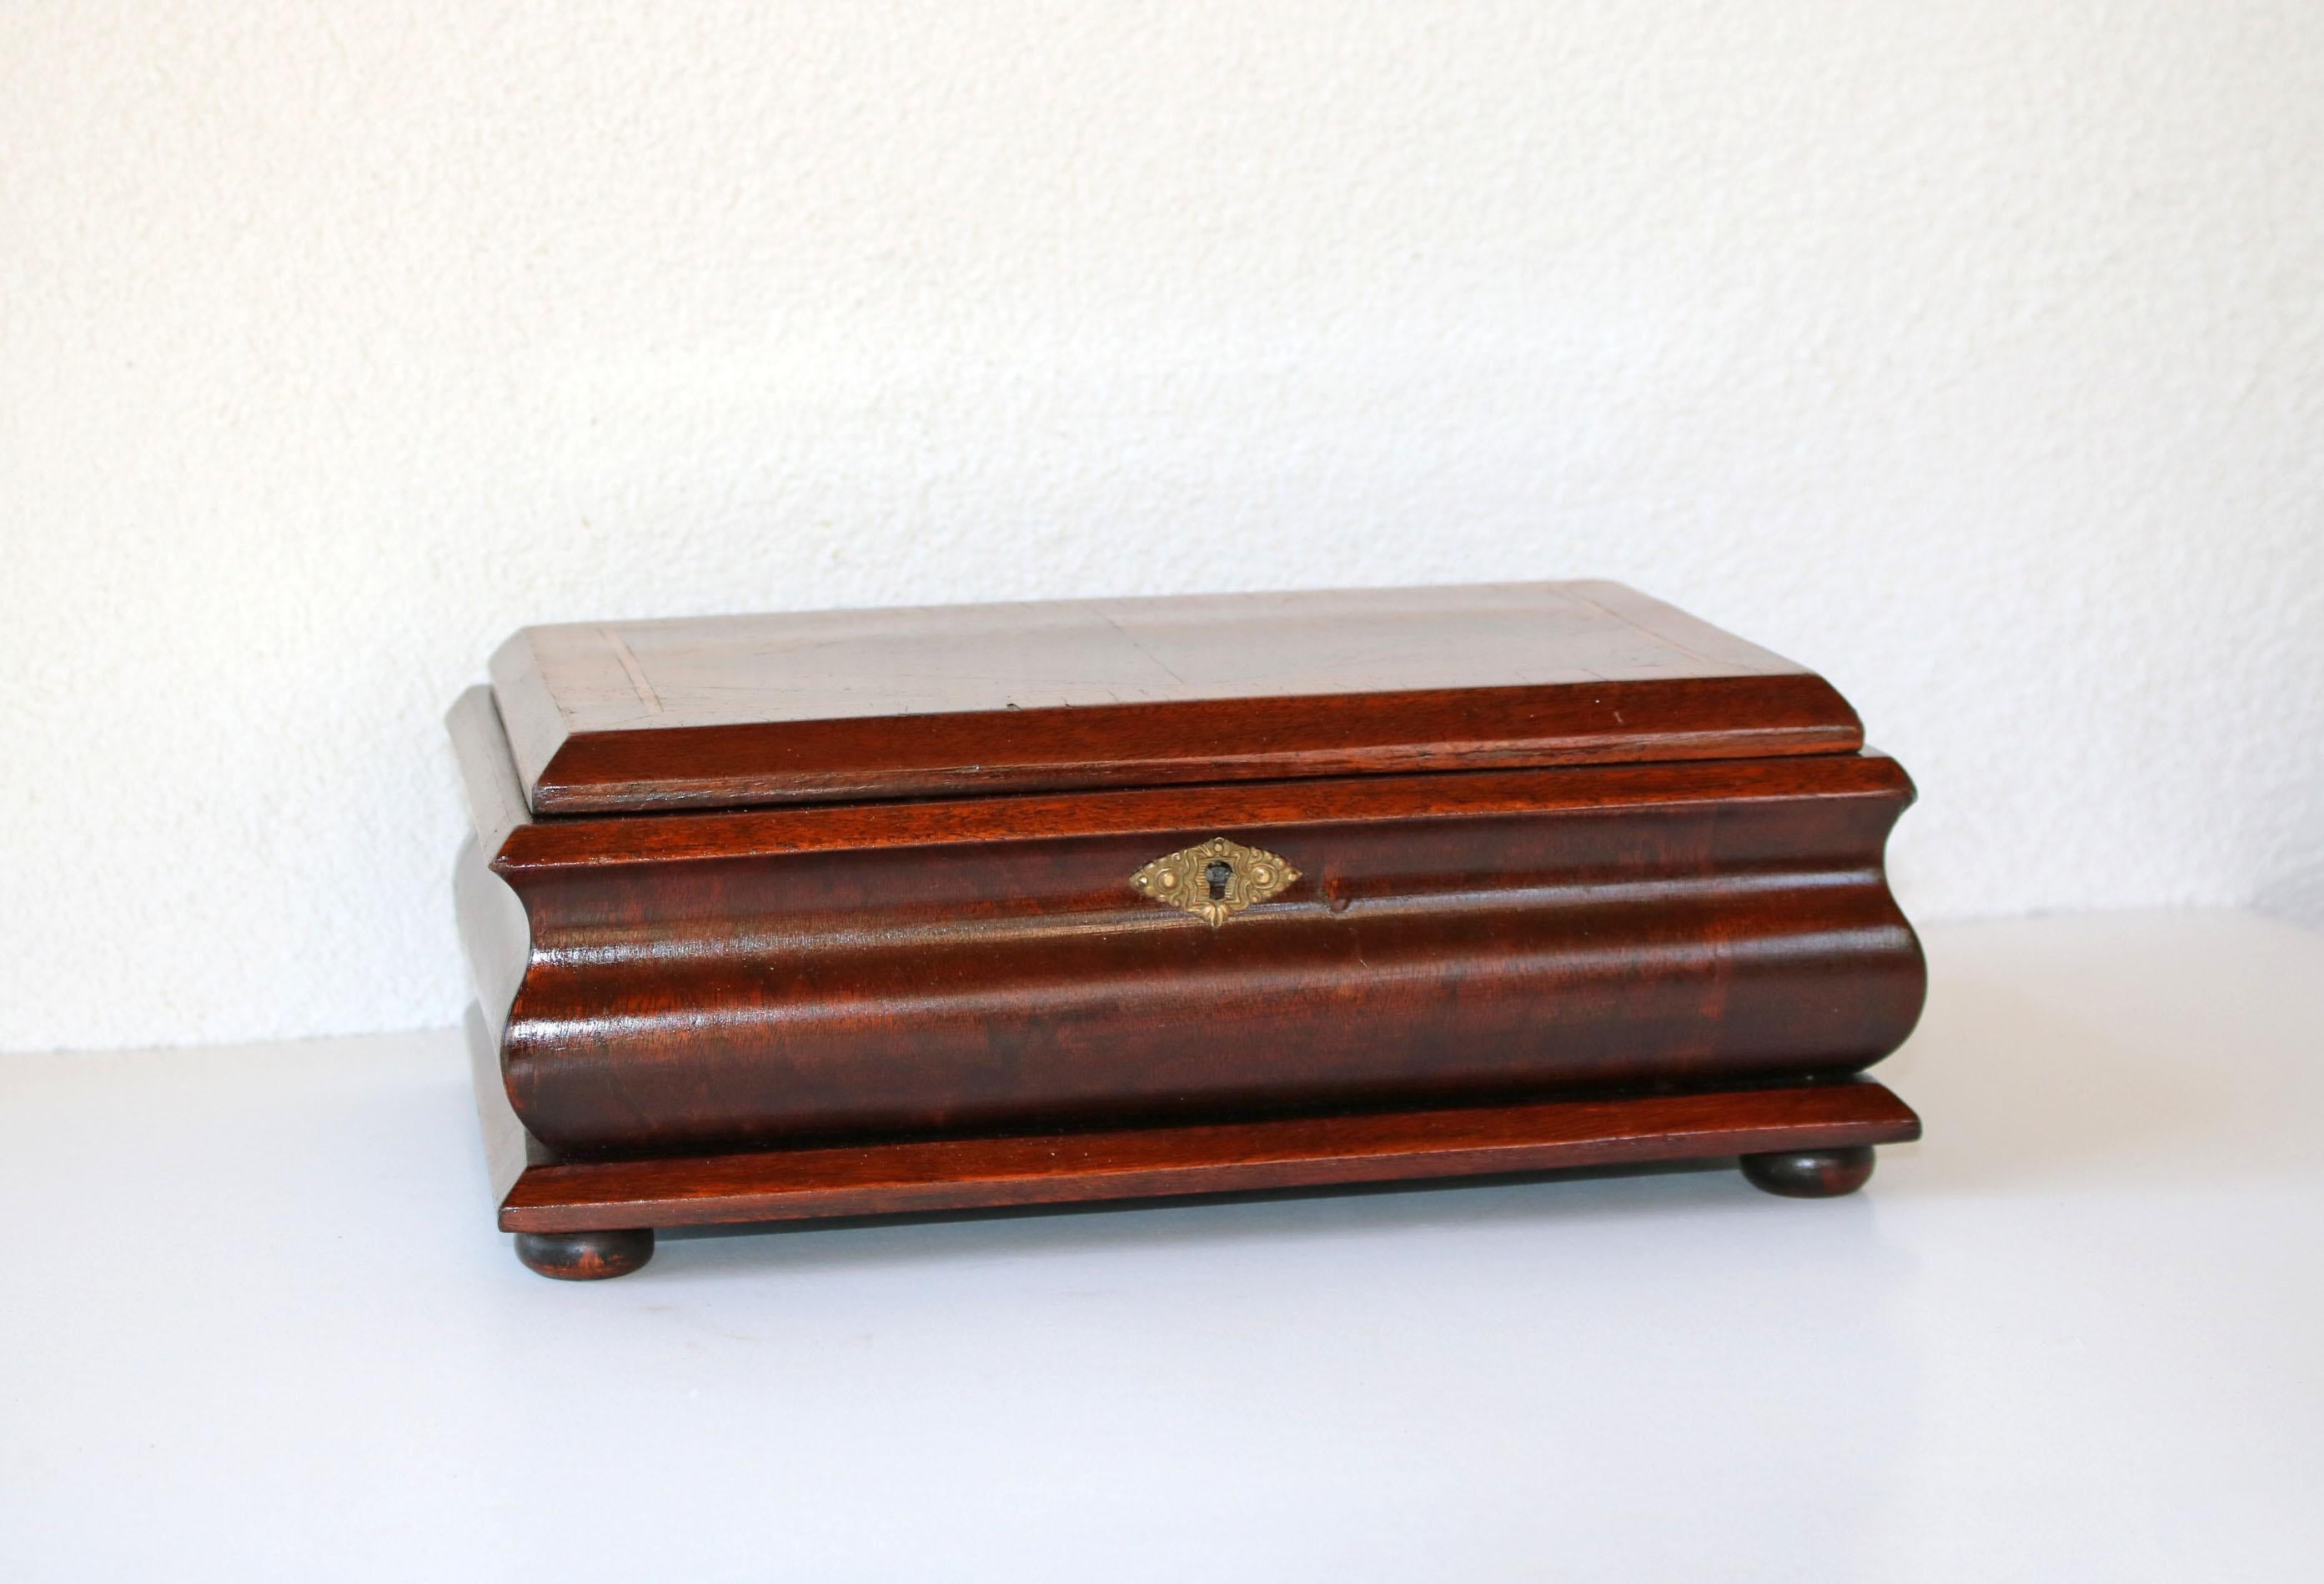 A very nice cigar box suitable to any smoking room with ample space even for the biggest cigars and accessories.